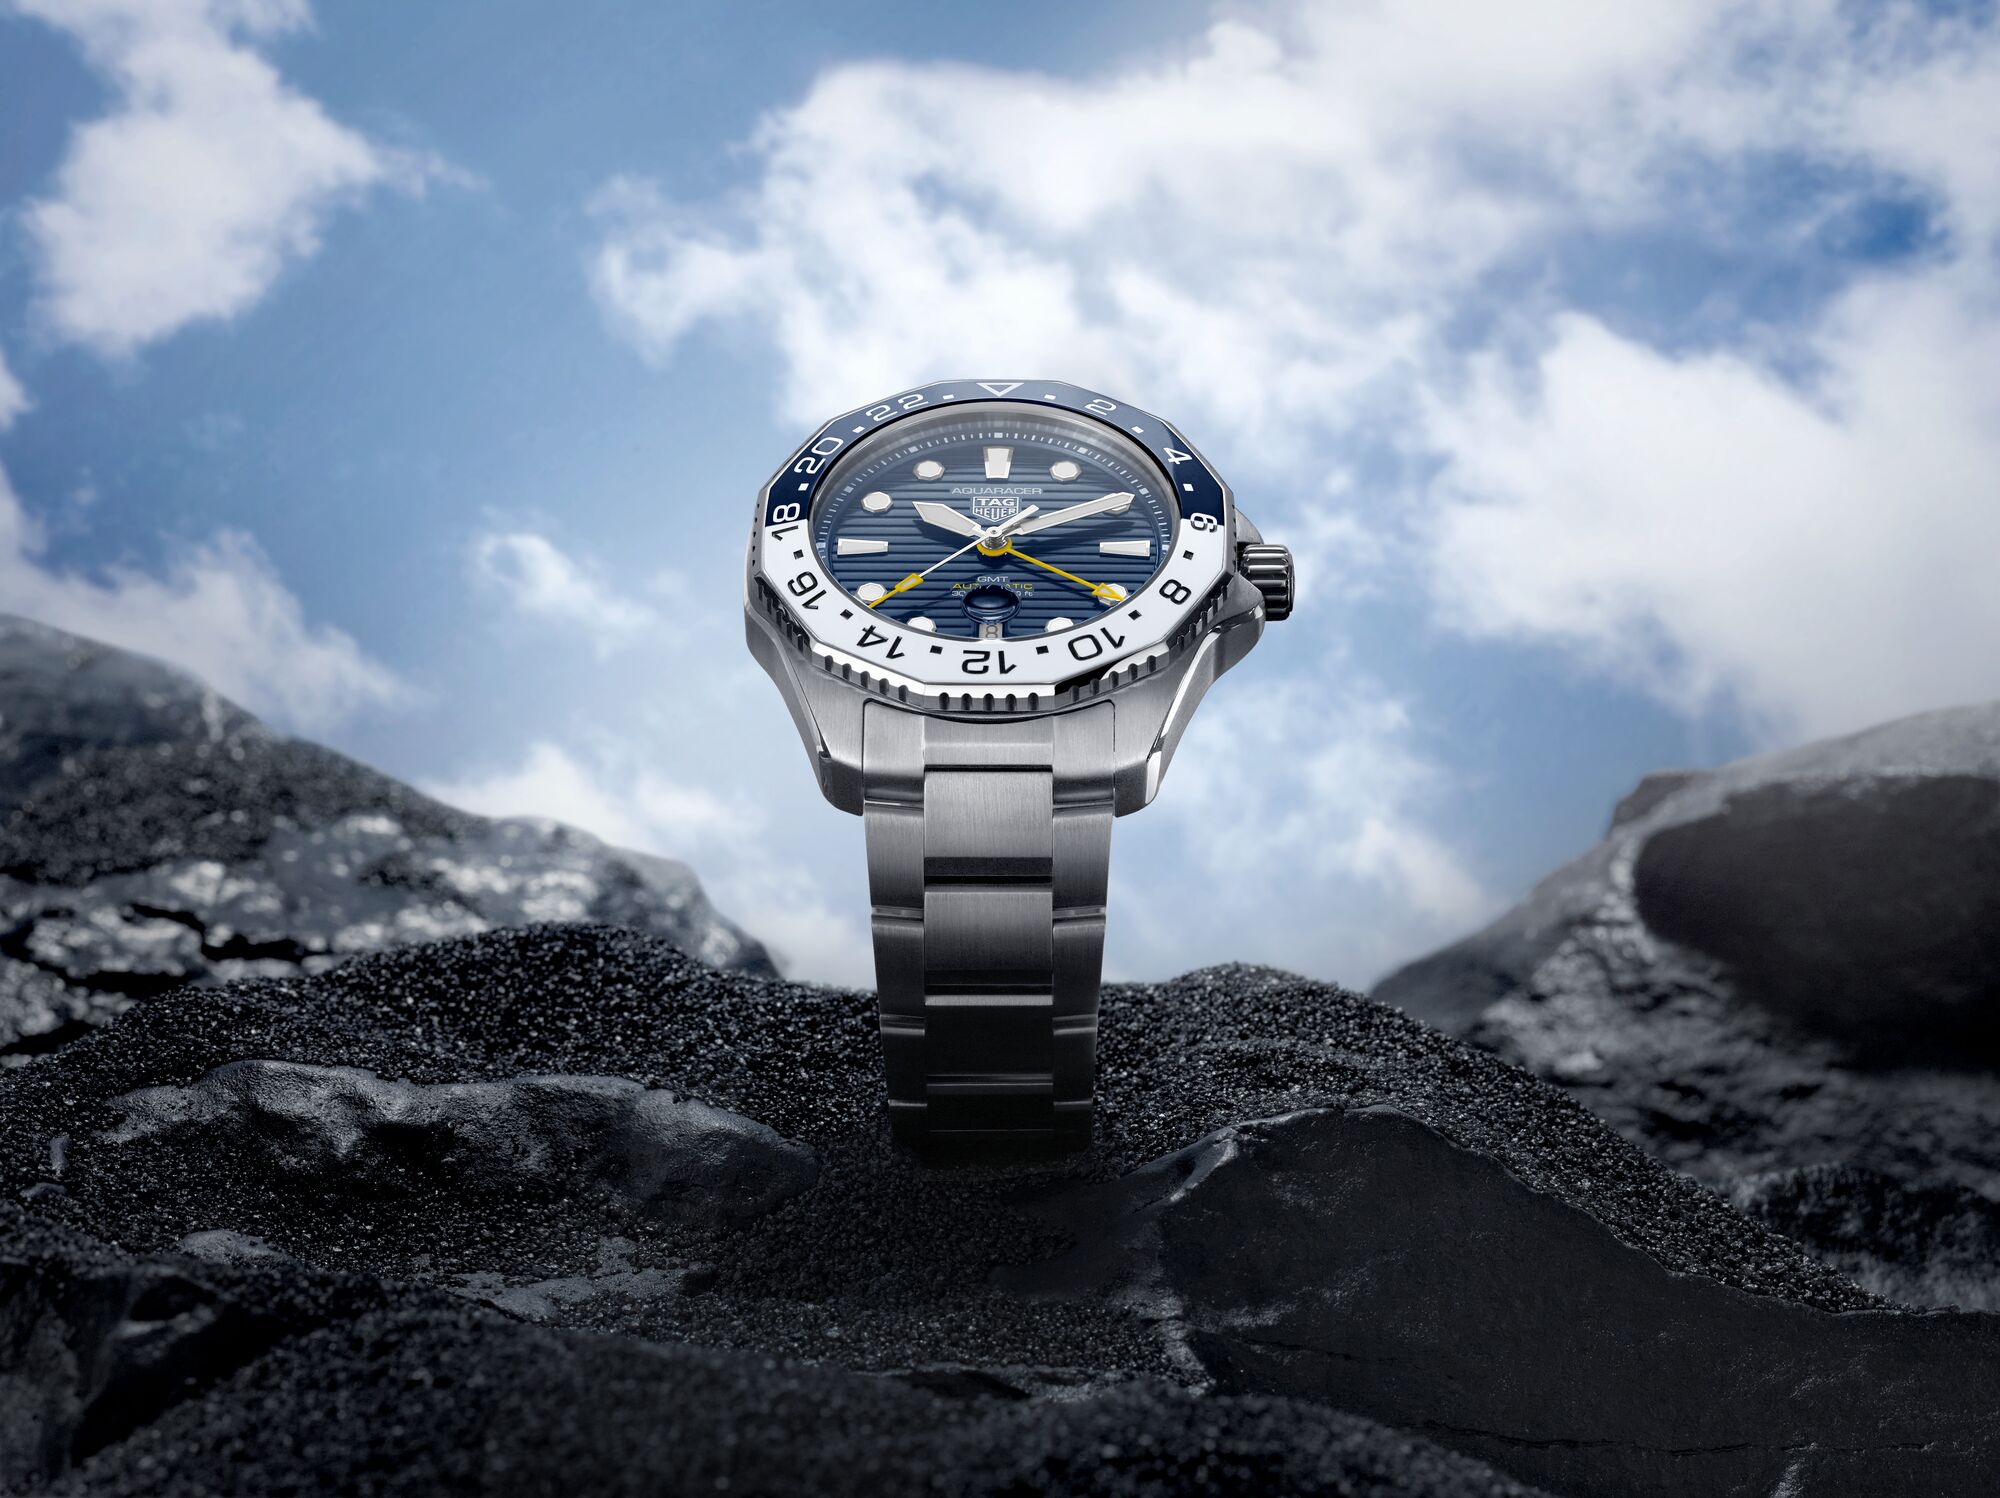 The TAG Heuer Aquaracer Professional 300 Travels Across Time